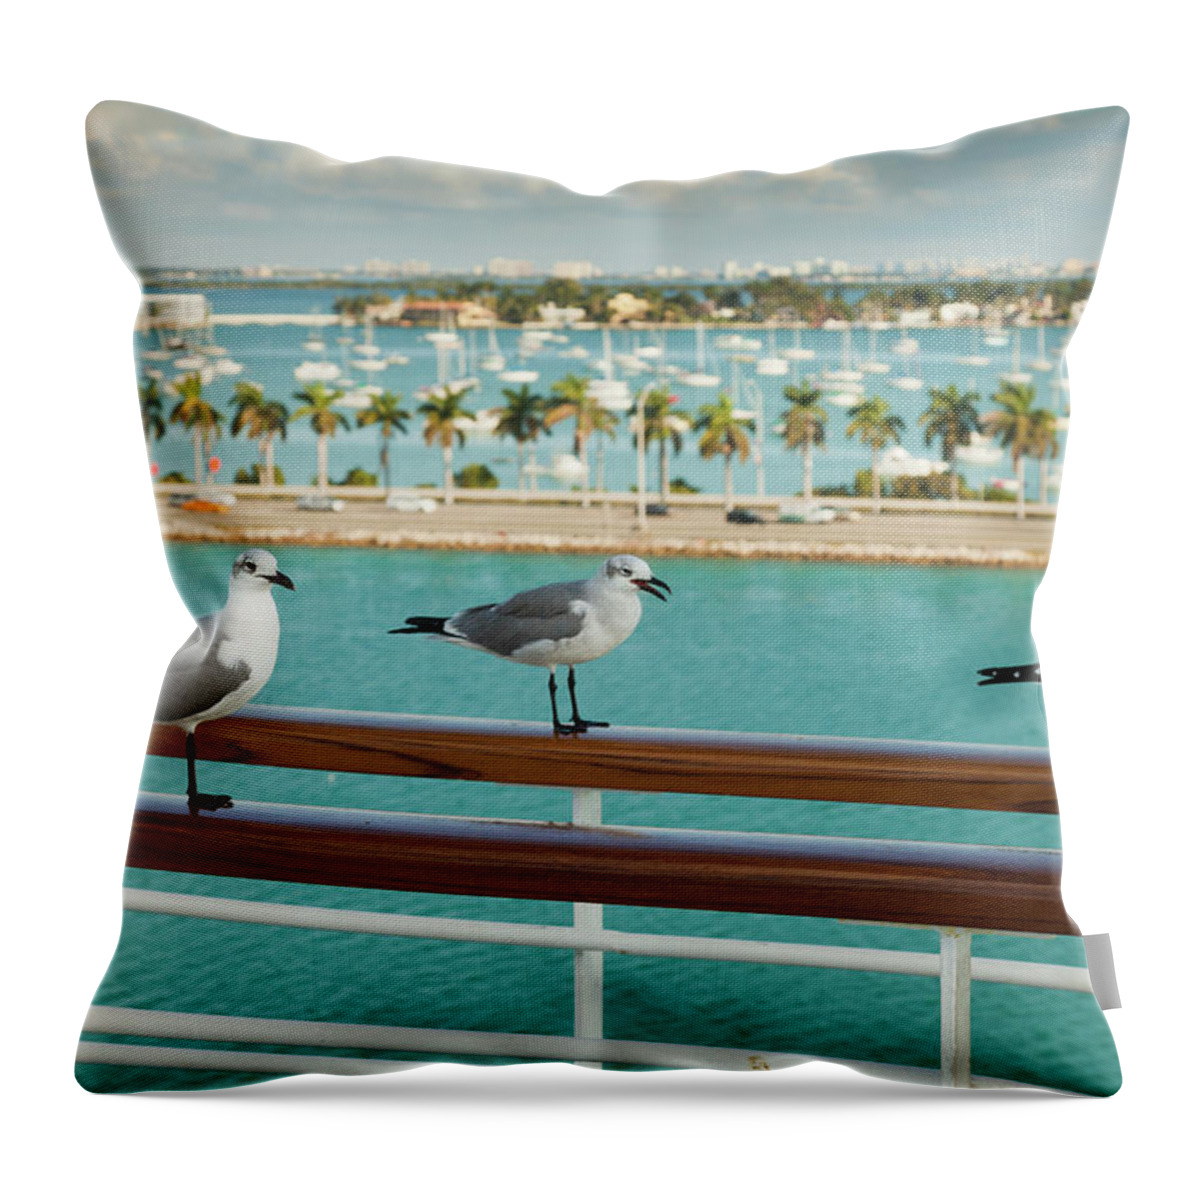 In A Row Throw Pillow featuring the photograph Sea Gulls On Railing Of Cruise Ship by Juan Silva